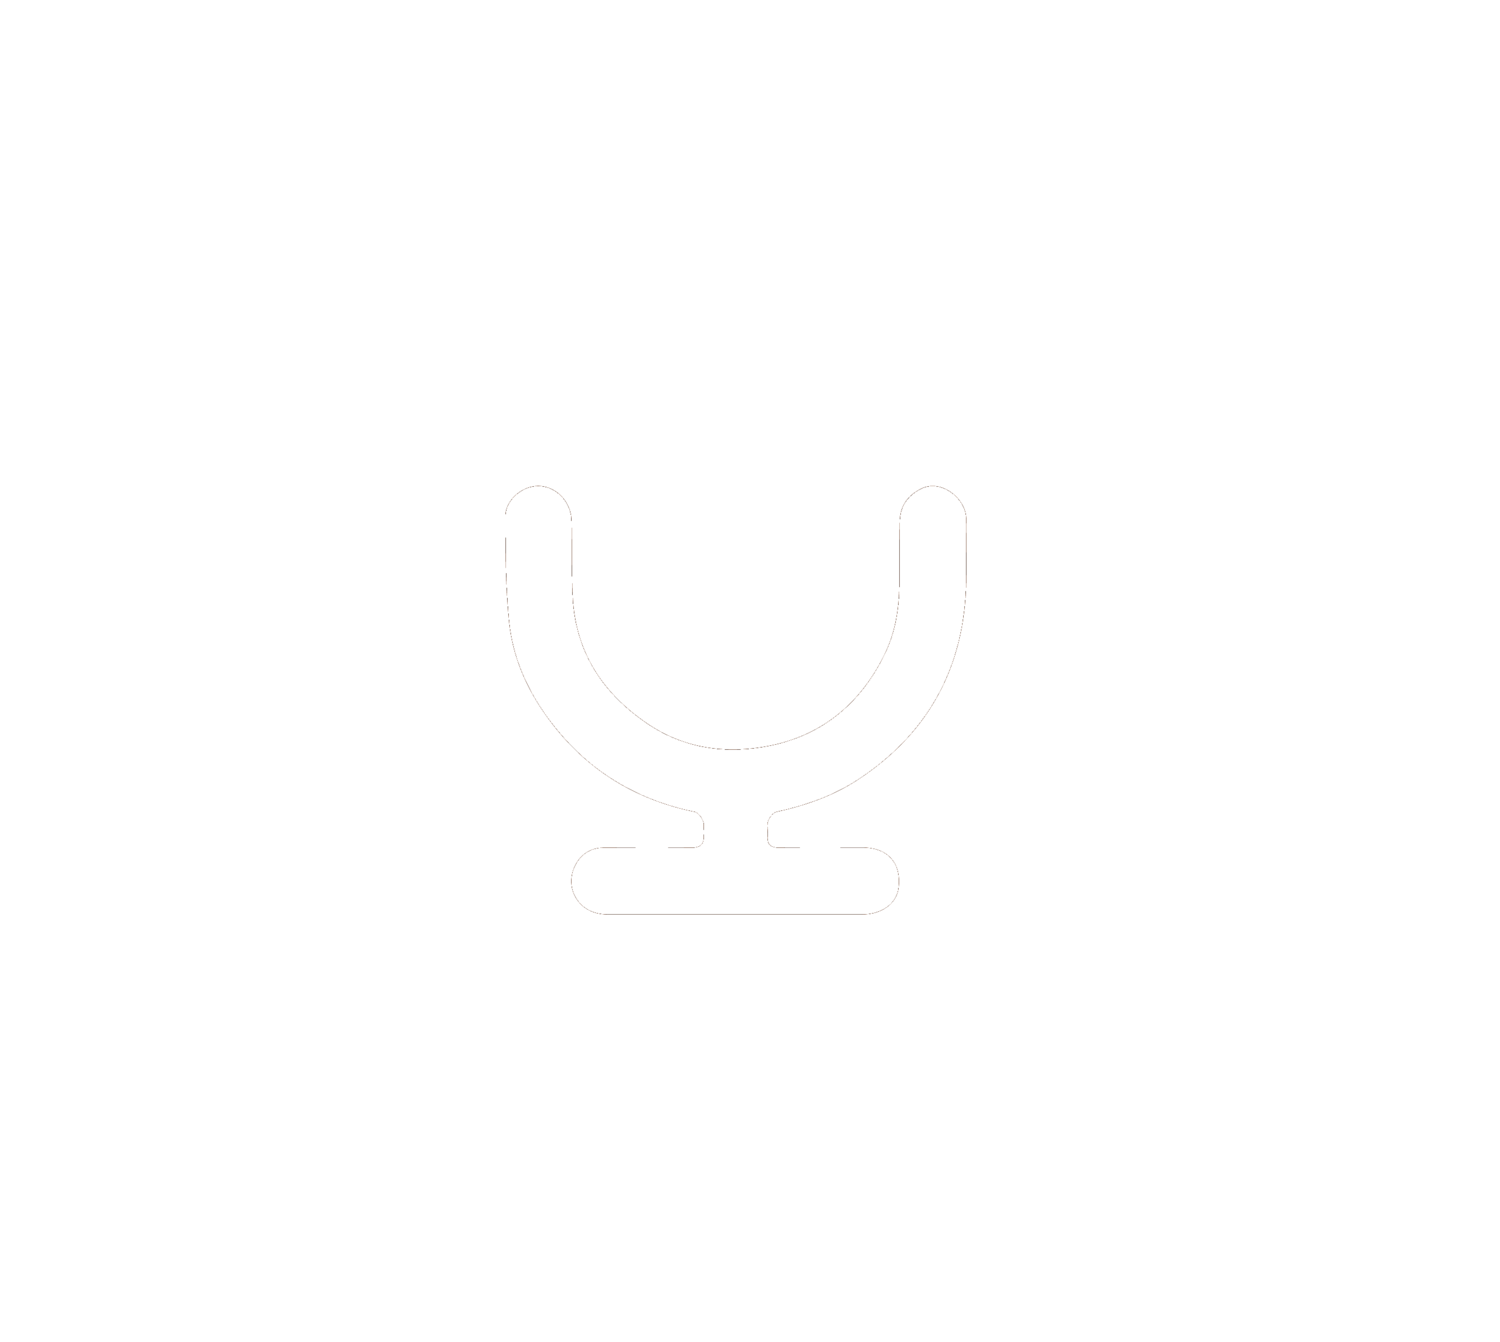 FireRTC - No Nonsense Free Phone Calls To the US and Canada